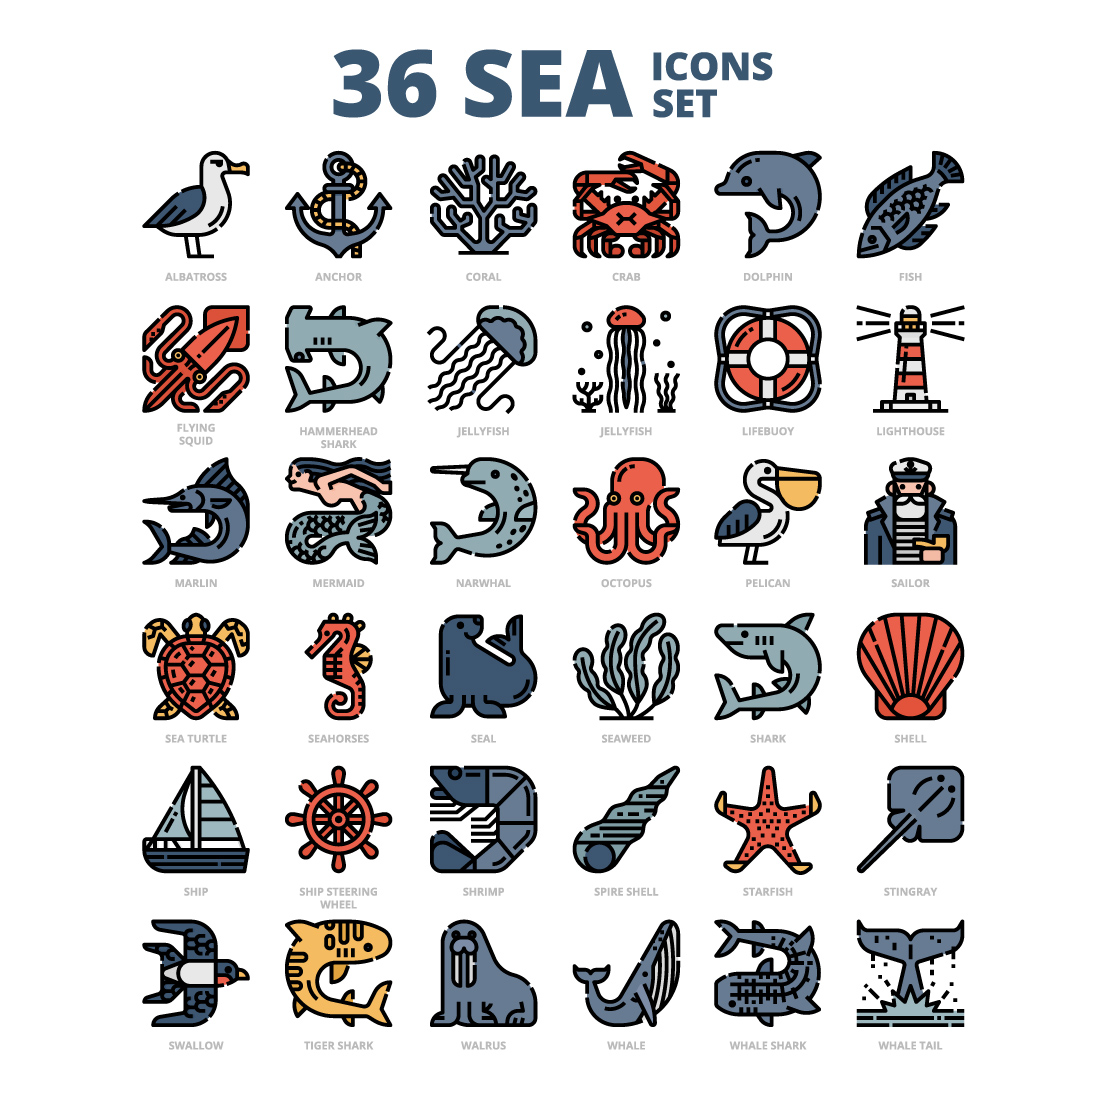 36 Sea Icons Set x 4 Styles cover image.